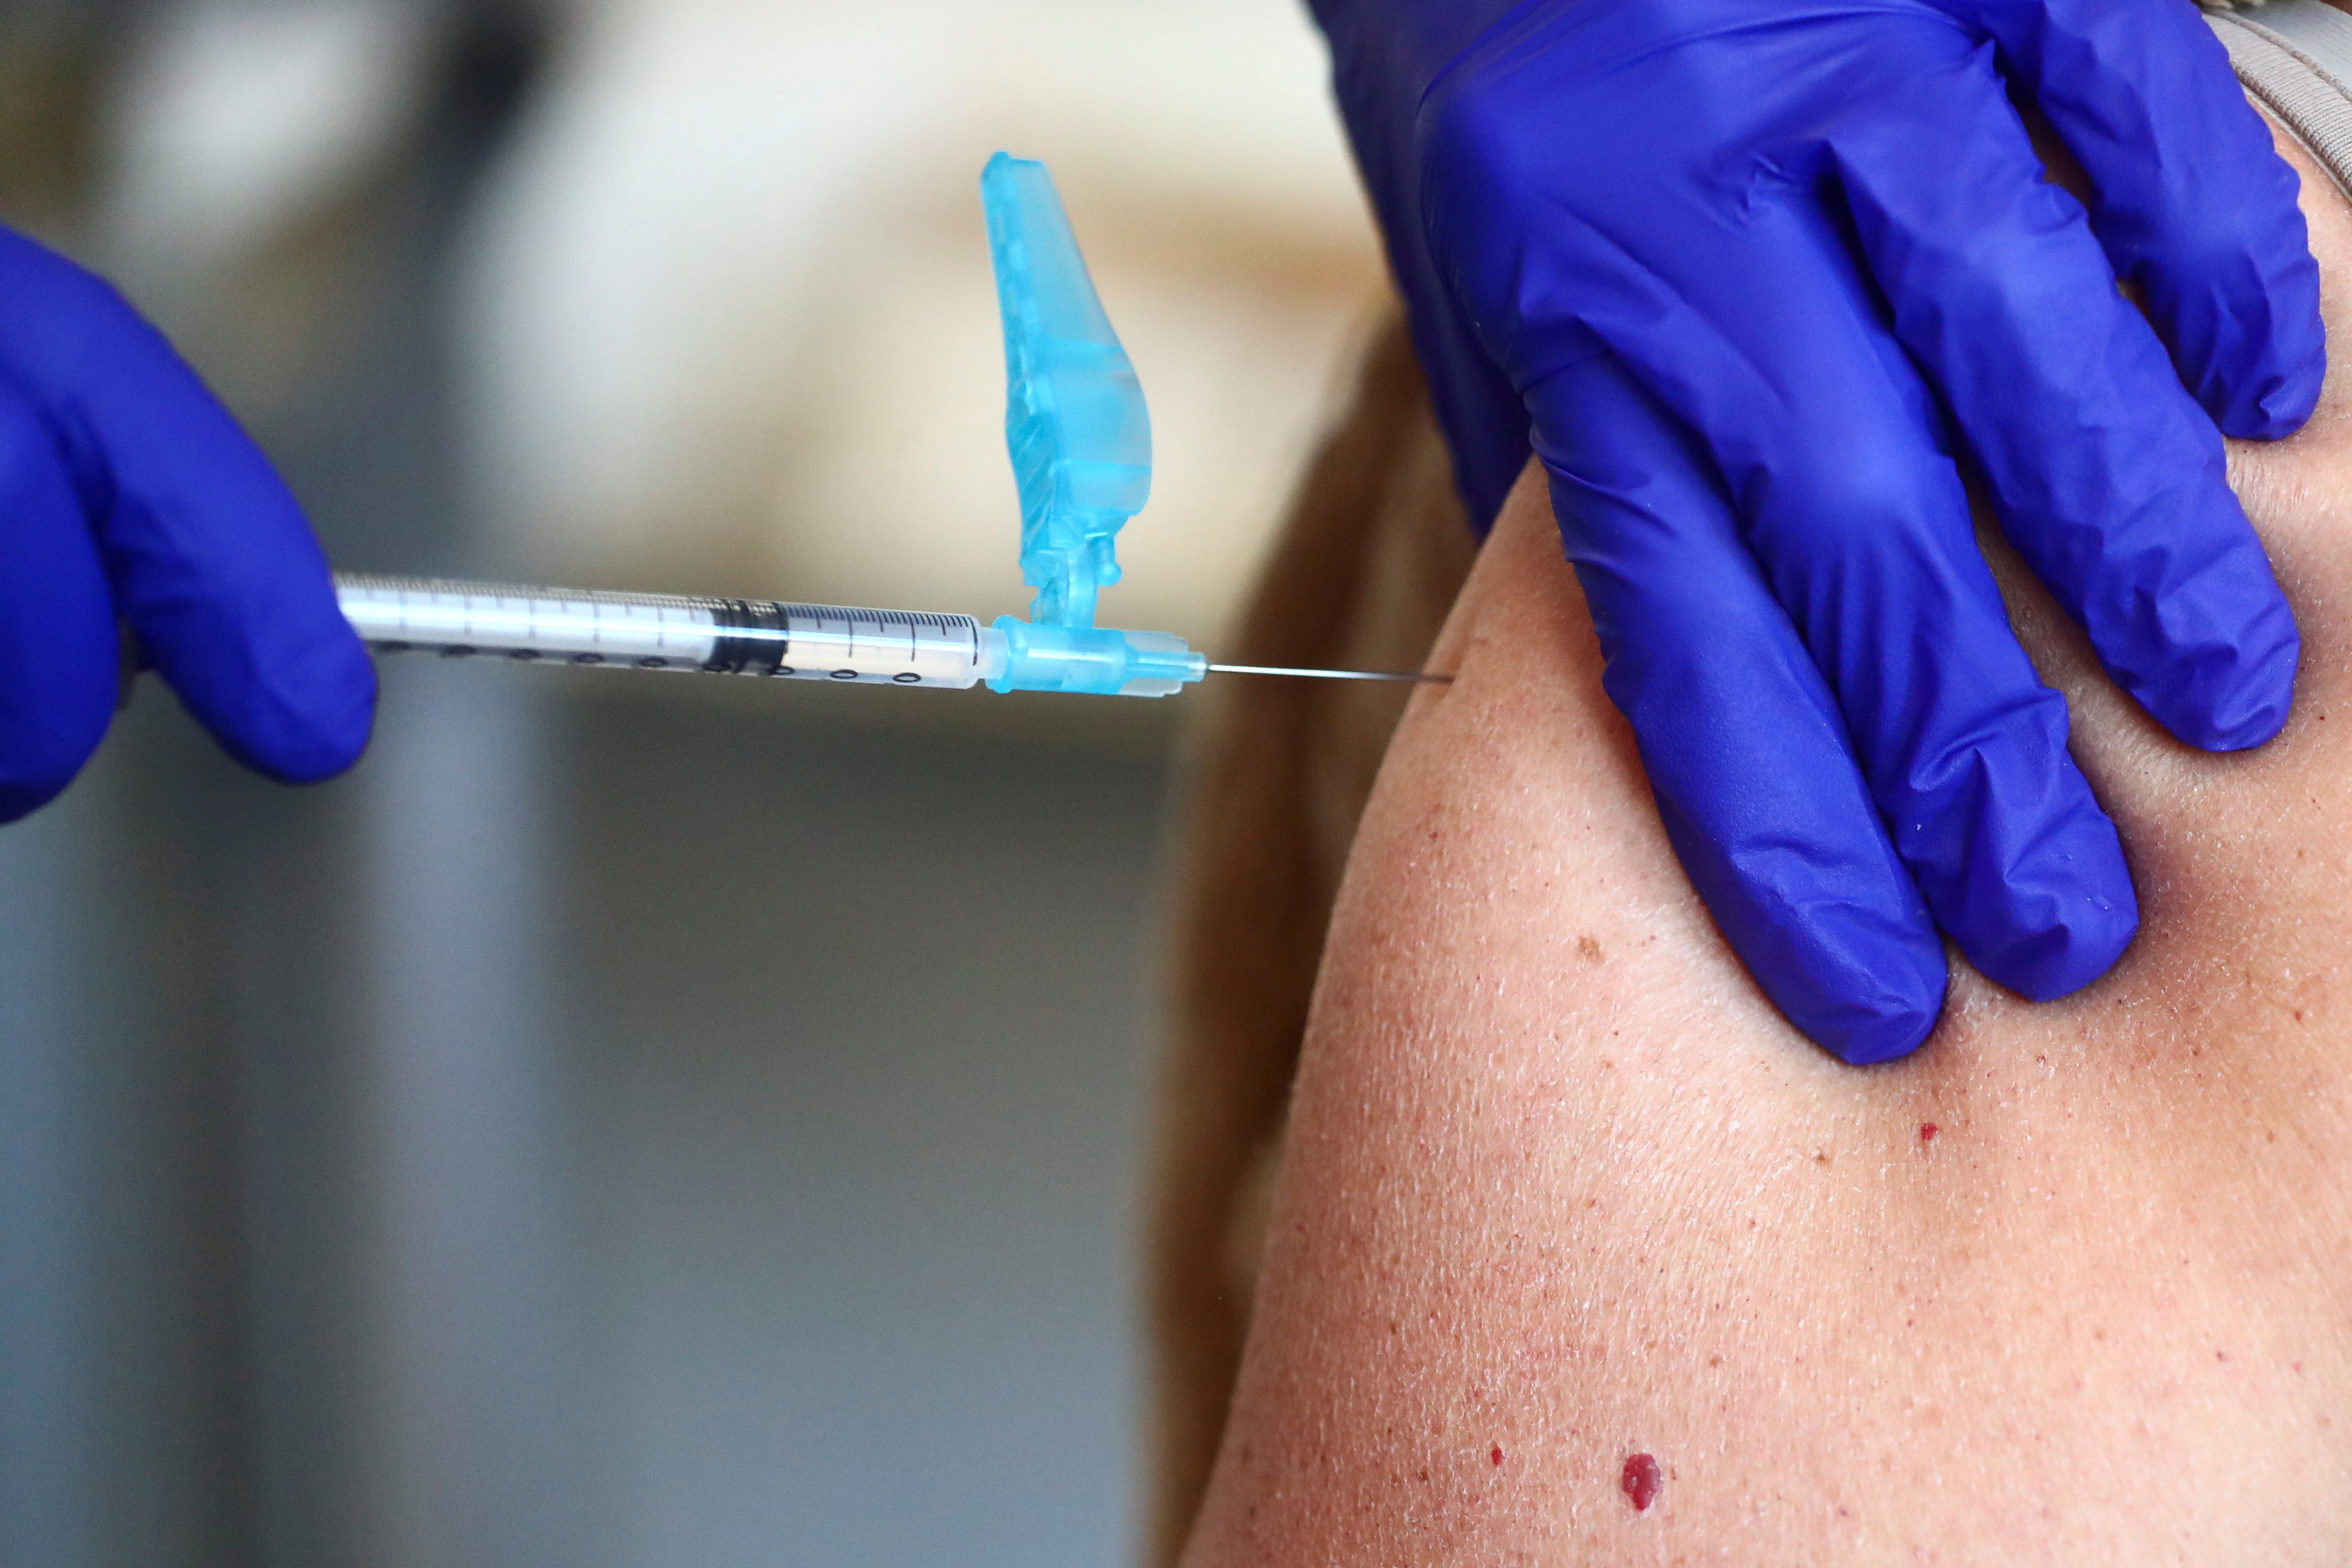 Health worker receives an injection with a dose of the Pfizer-BioNTech COVID-19 vaccine, in Madrid